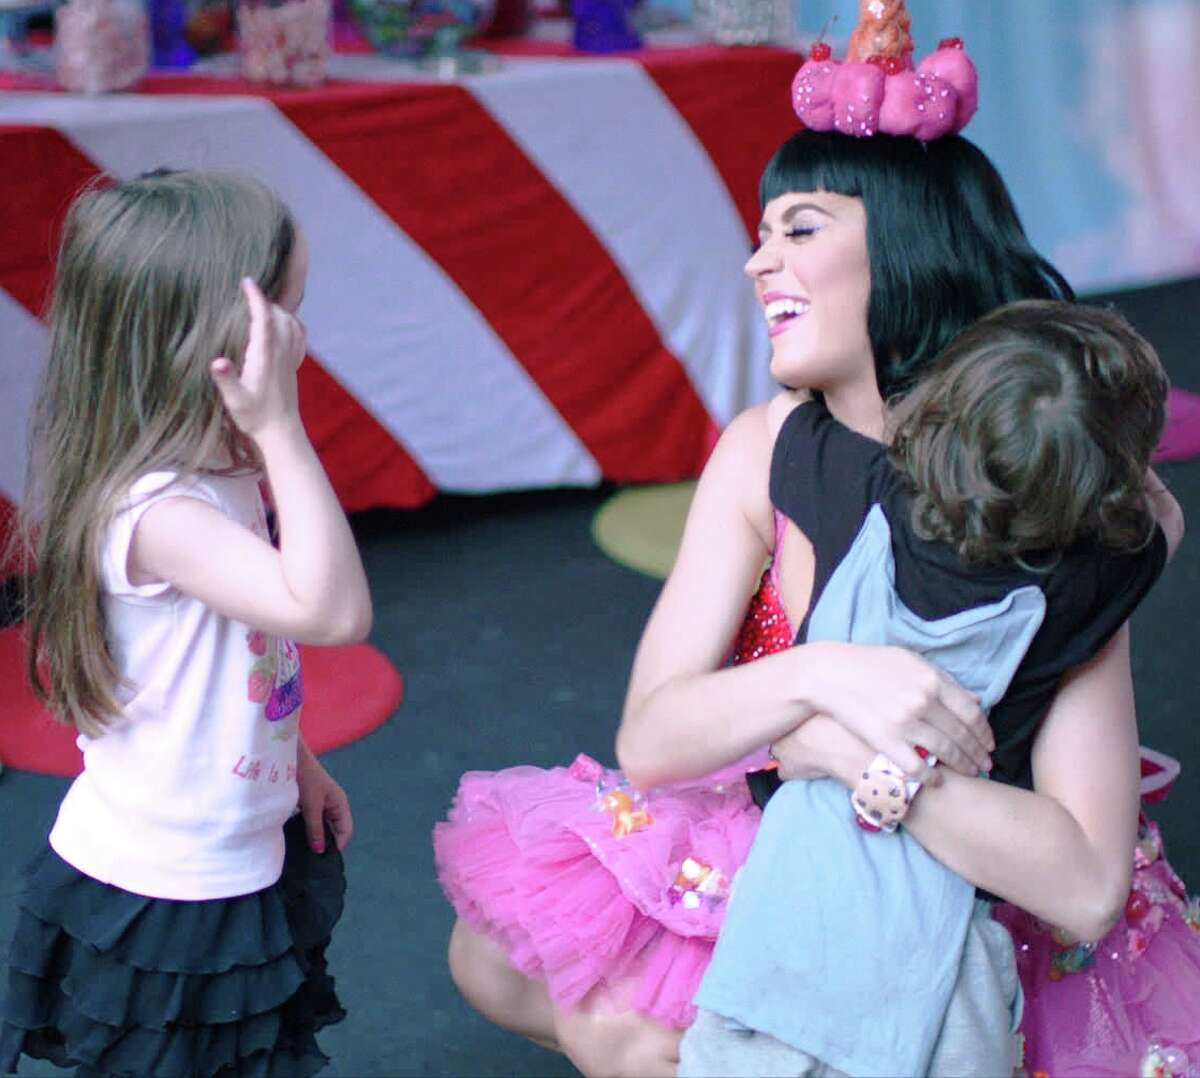 Katy Perry gets a hug from a young fan in a scene from the movie "Katy Perry: Part of Me."